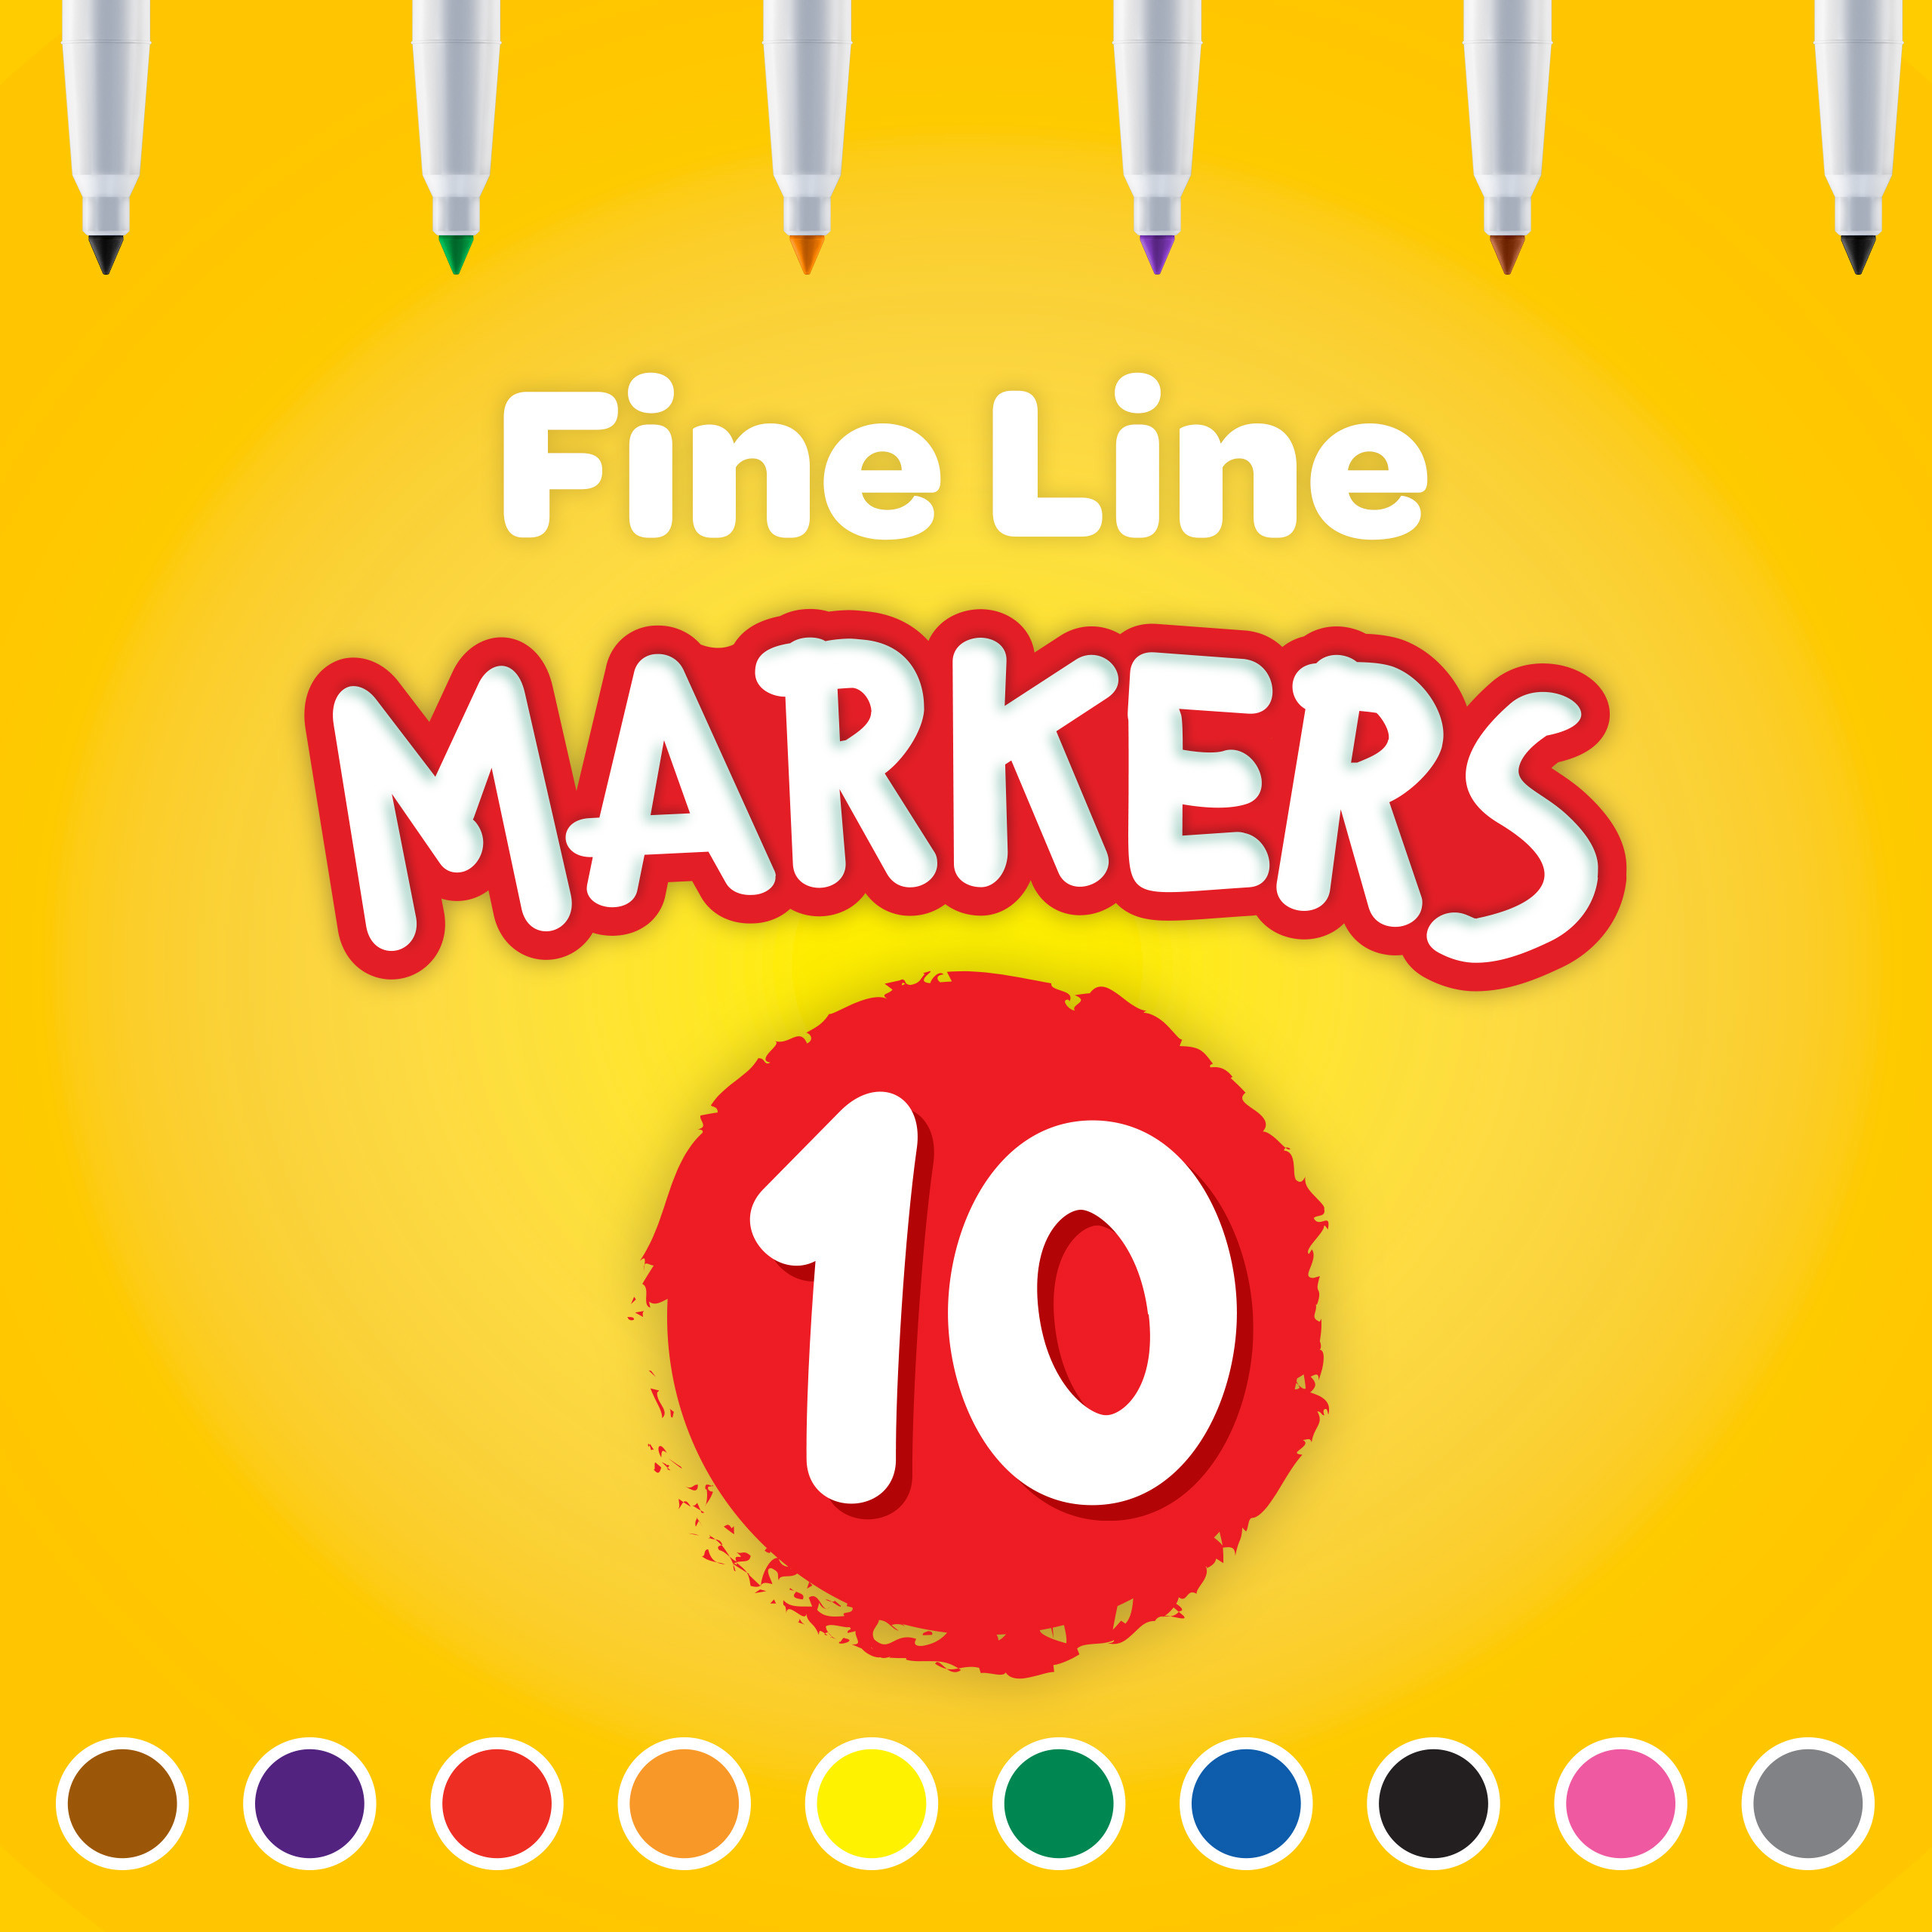 Crayola Classic Thin Line Marker Set, 10 Ct, Multi Colors, Back to School Supplies for Kids - image 8 of 9